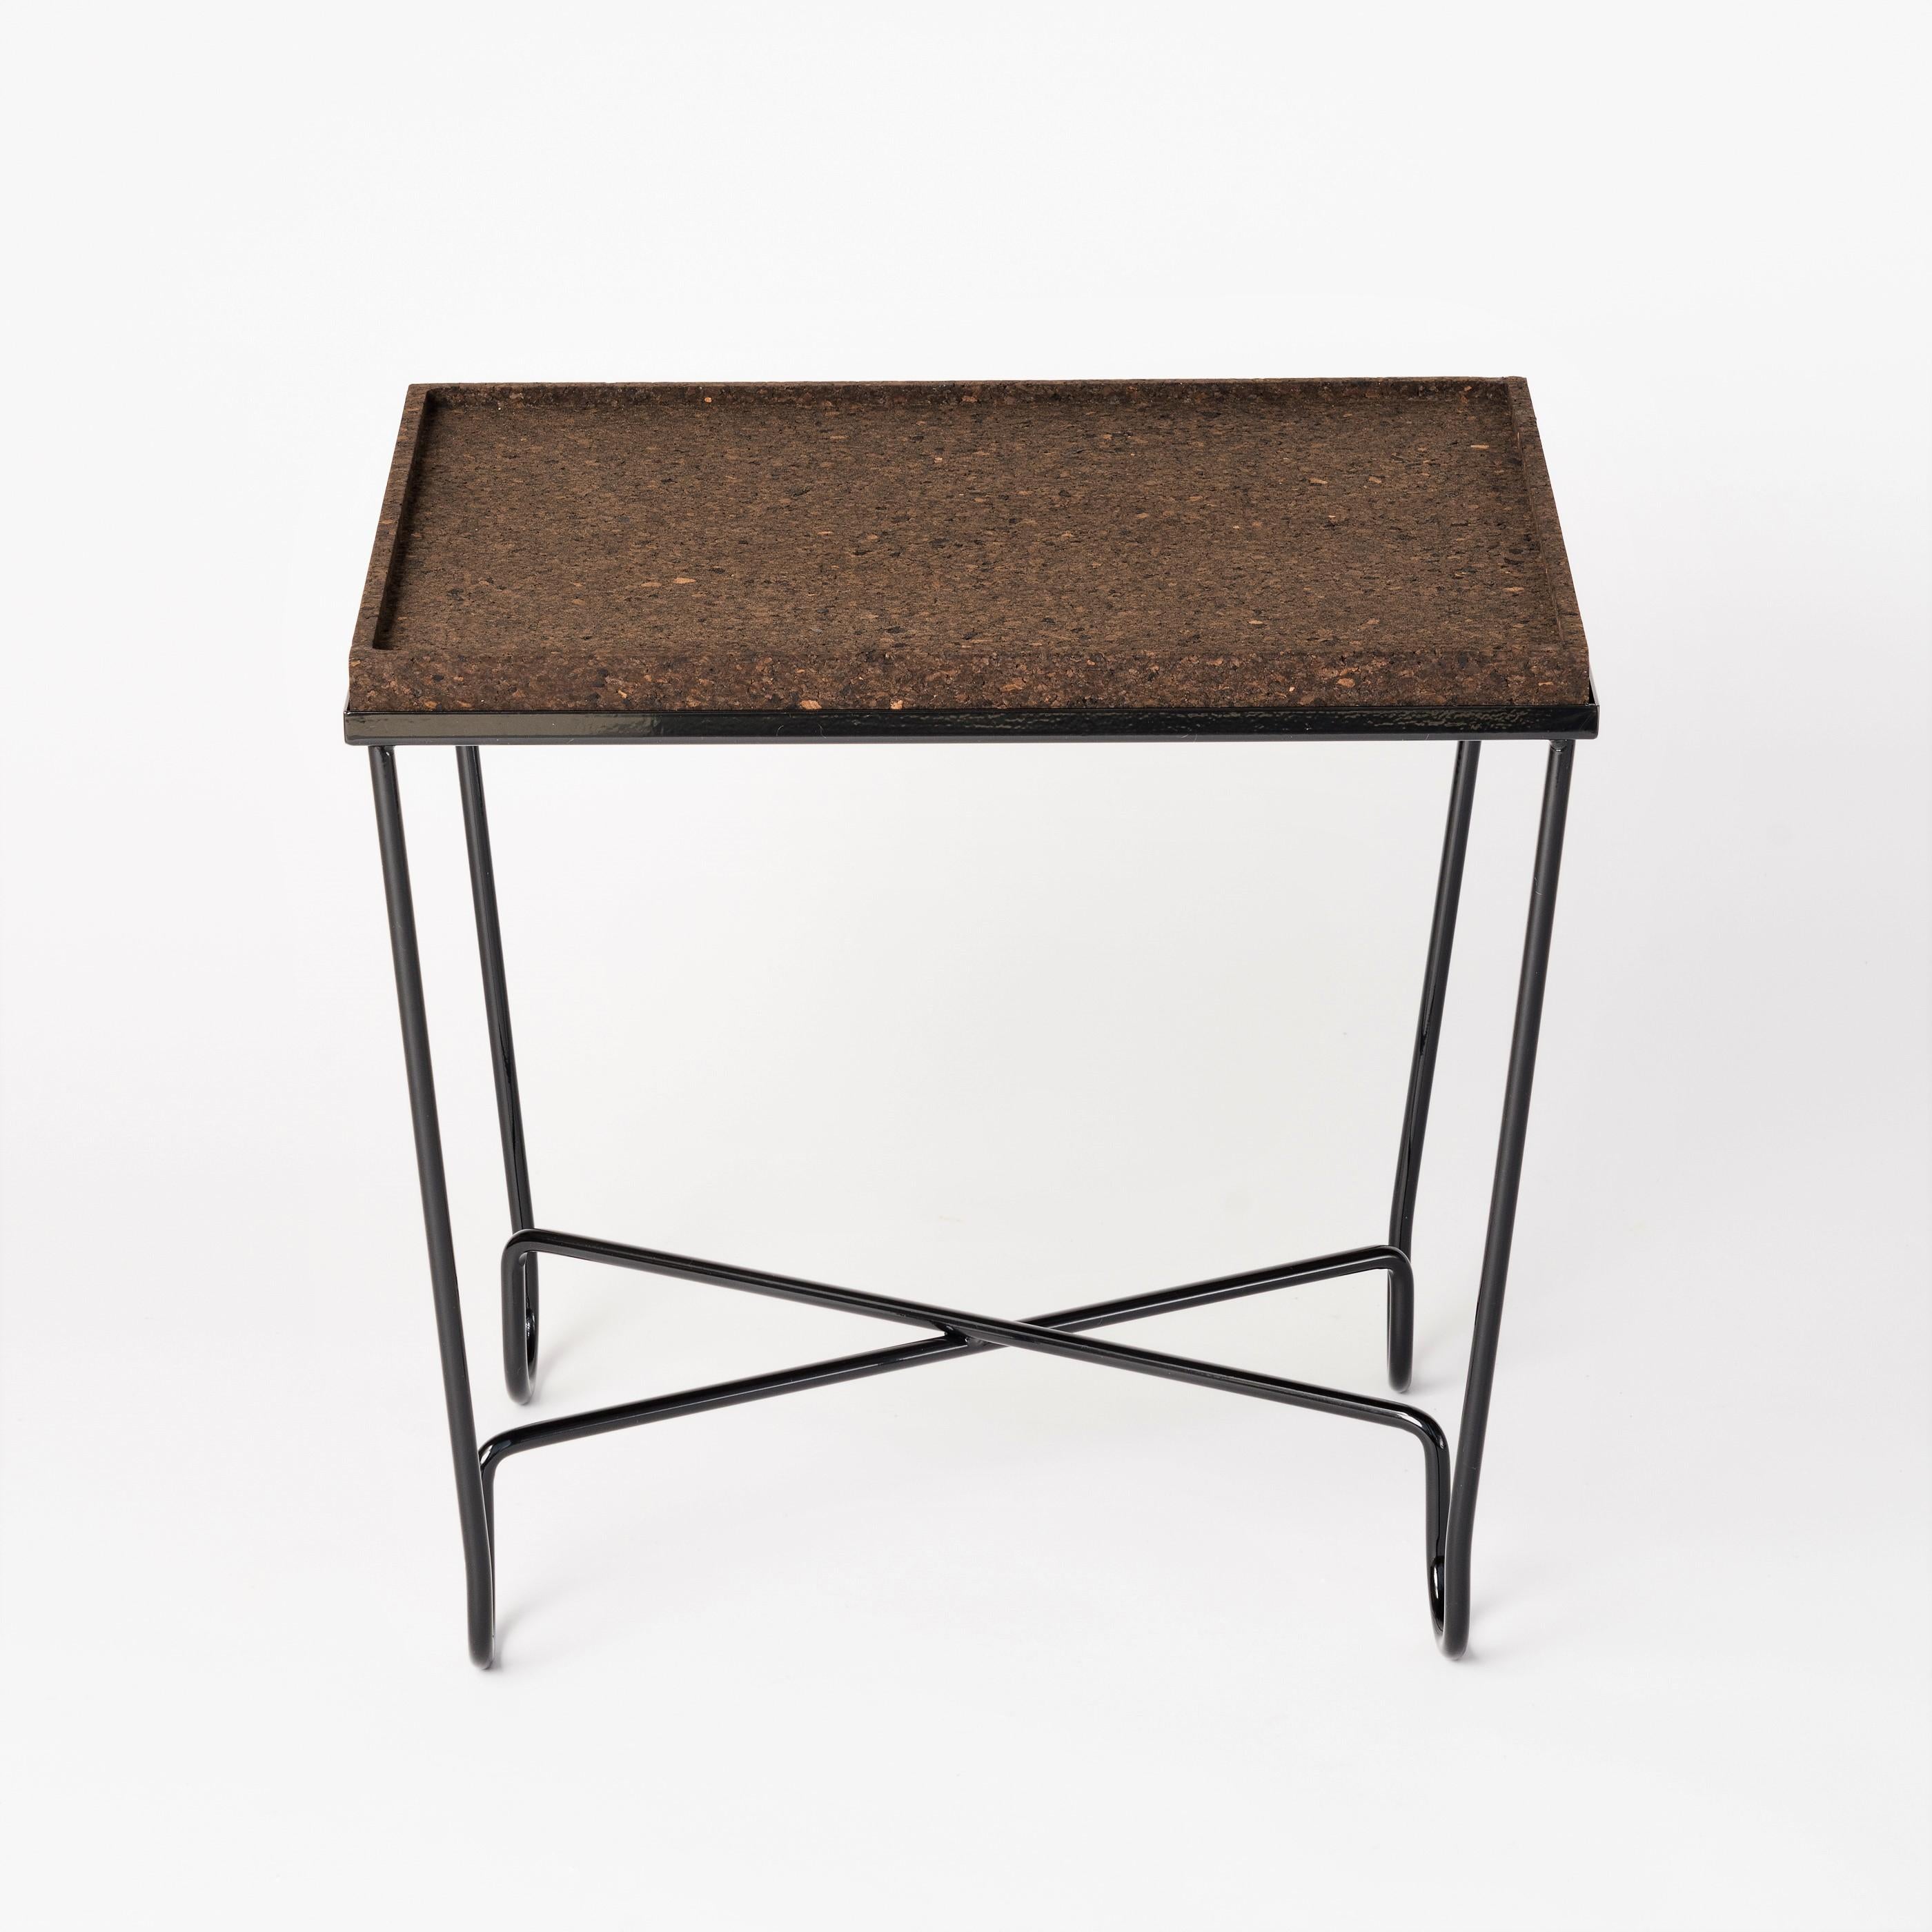 French Aronde Black Lacquered Steel Side Table with Burnt or Natural Cork Top  For Sale